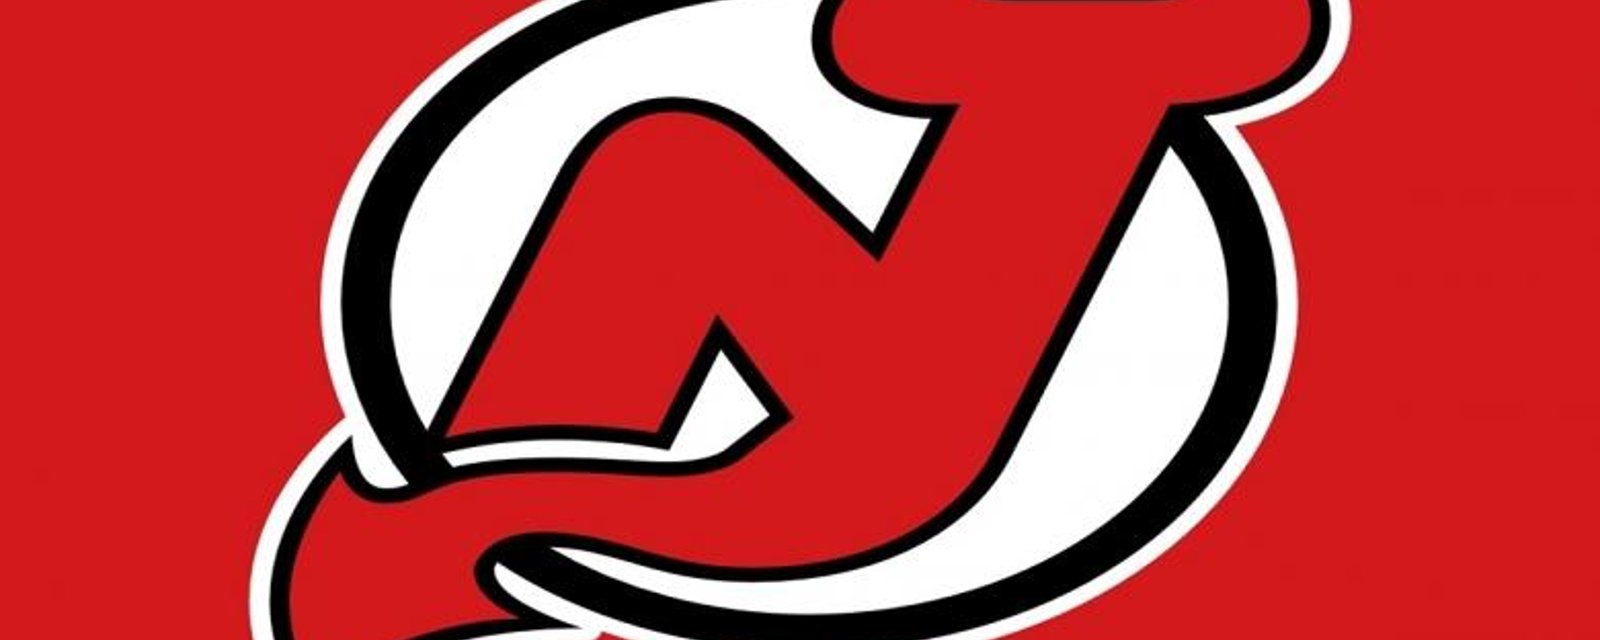 The New Jersey Devils will be rebranding their franchise next season.